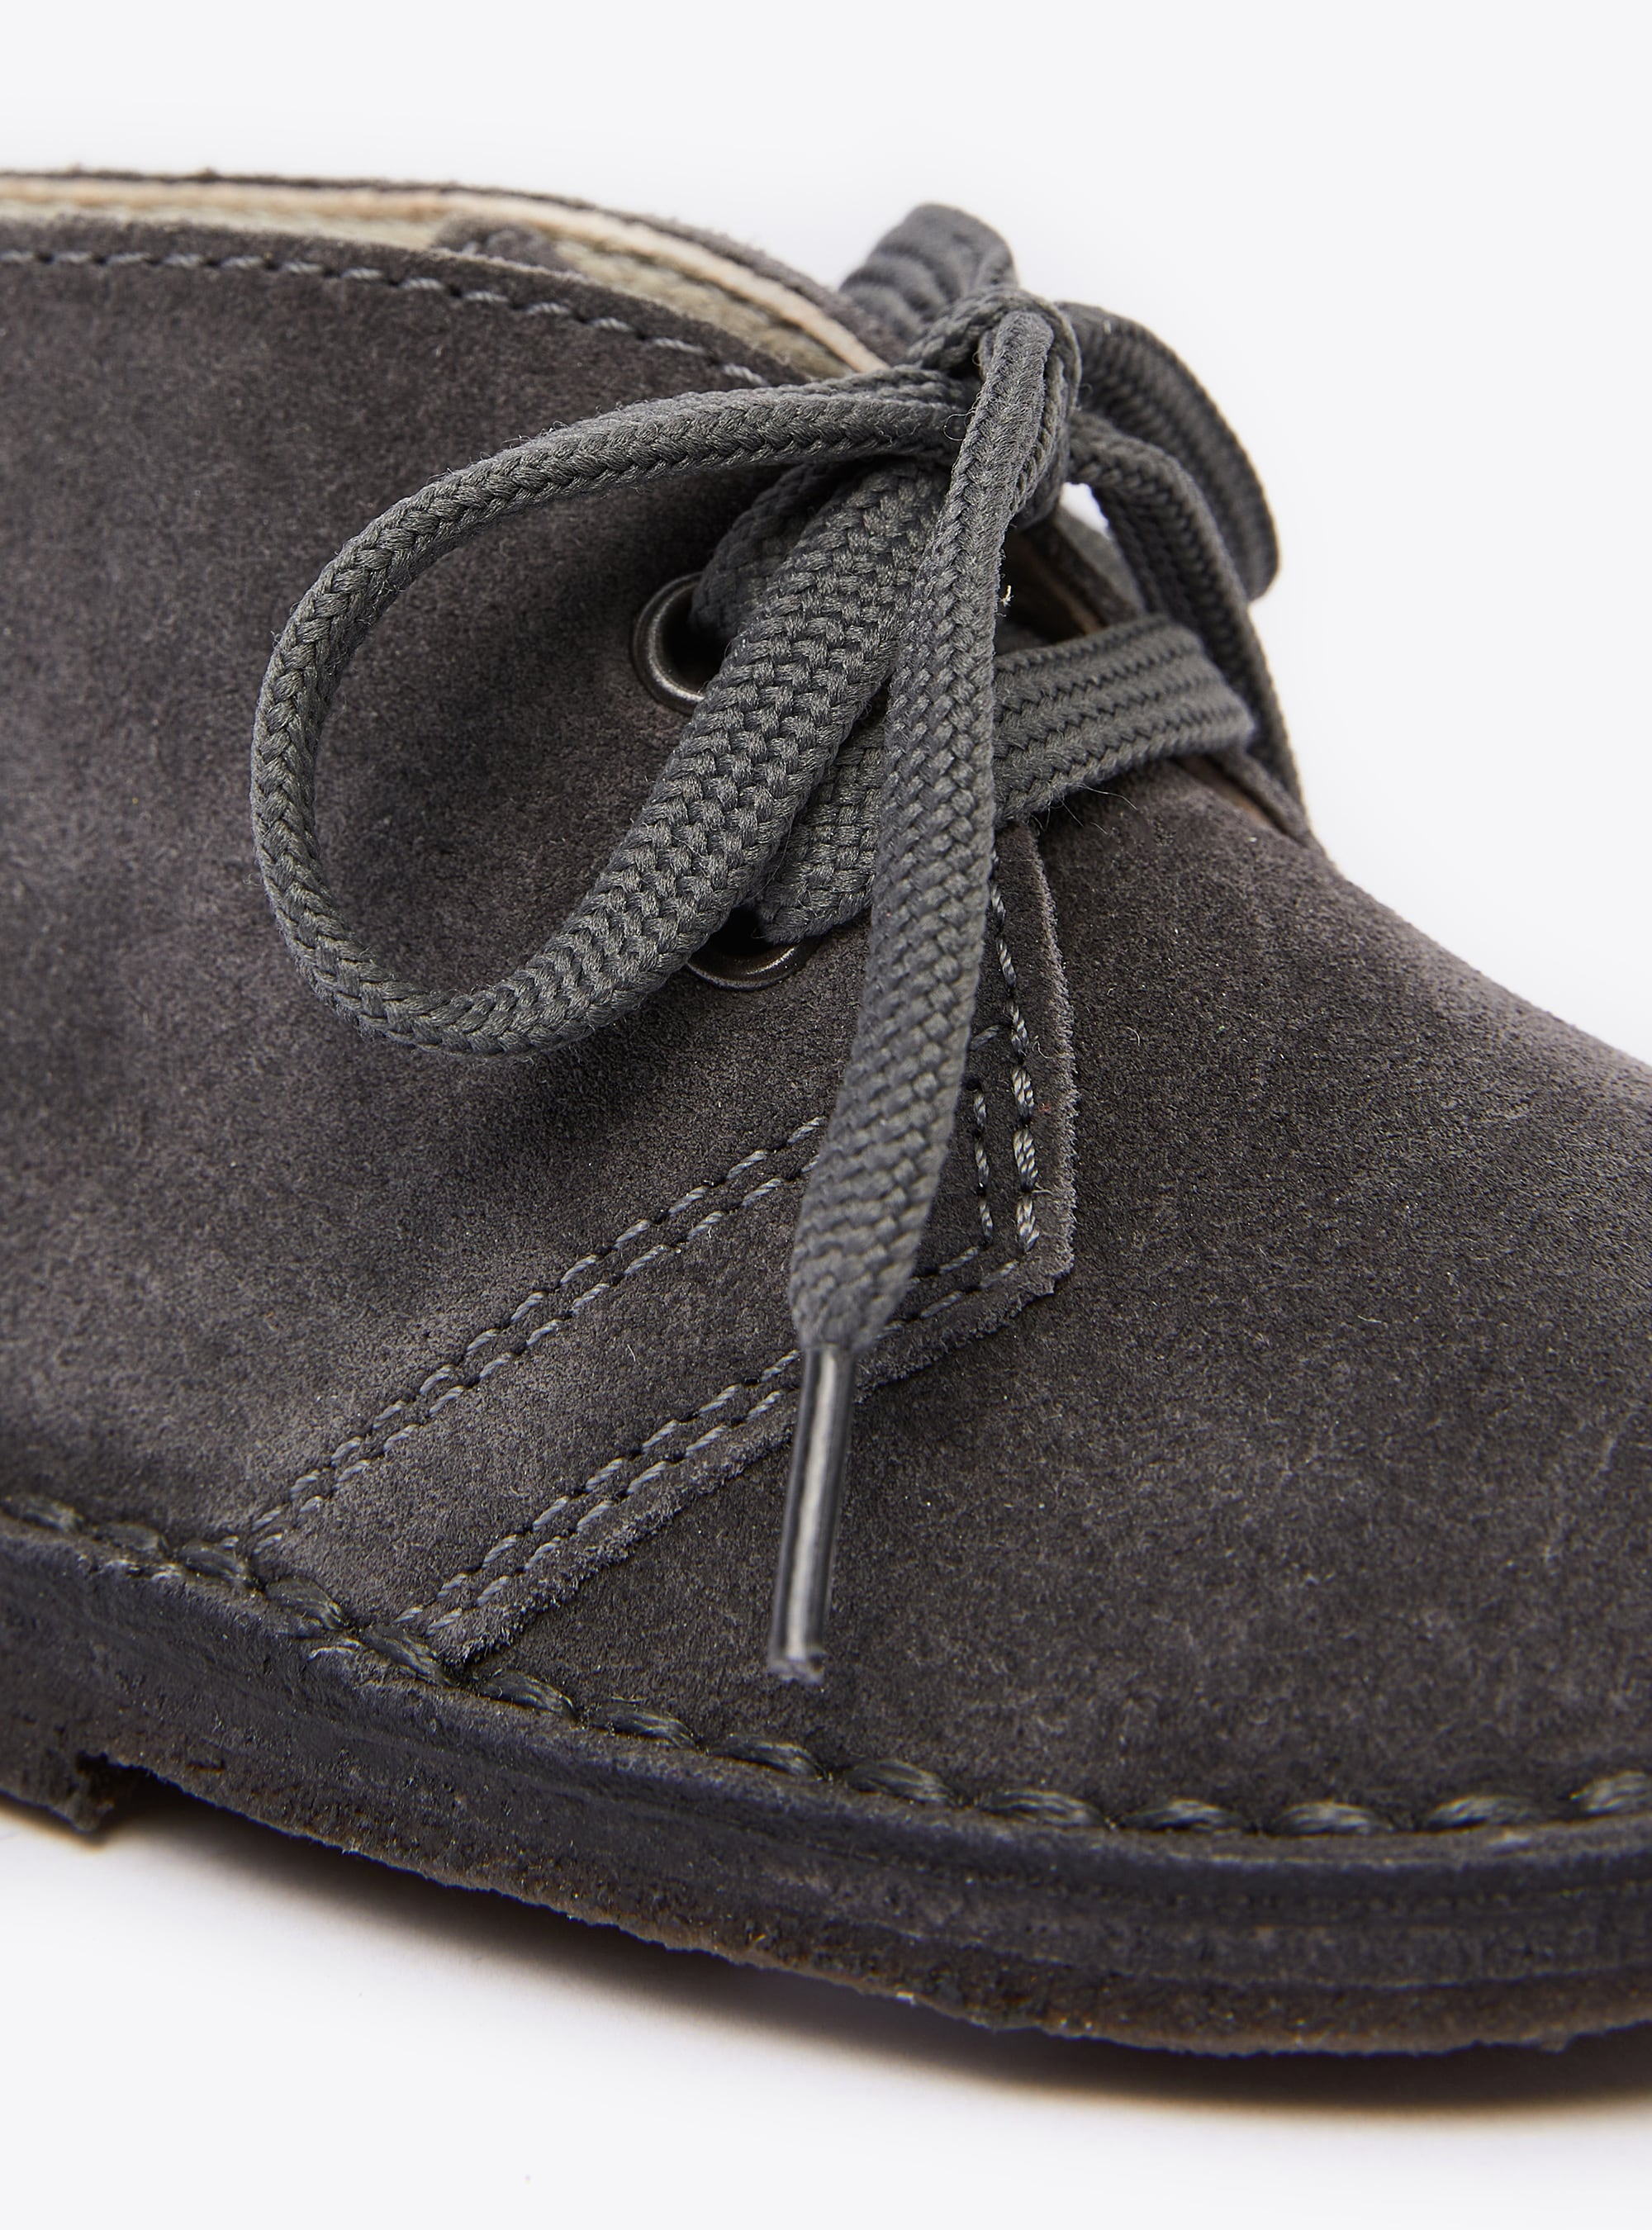 Charcoal grey suede baby shoes - Grey | Il Gufo